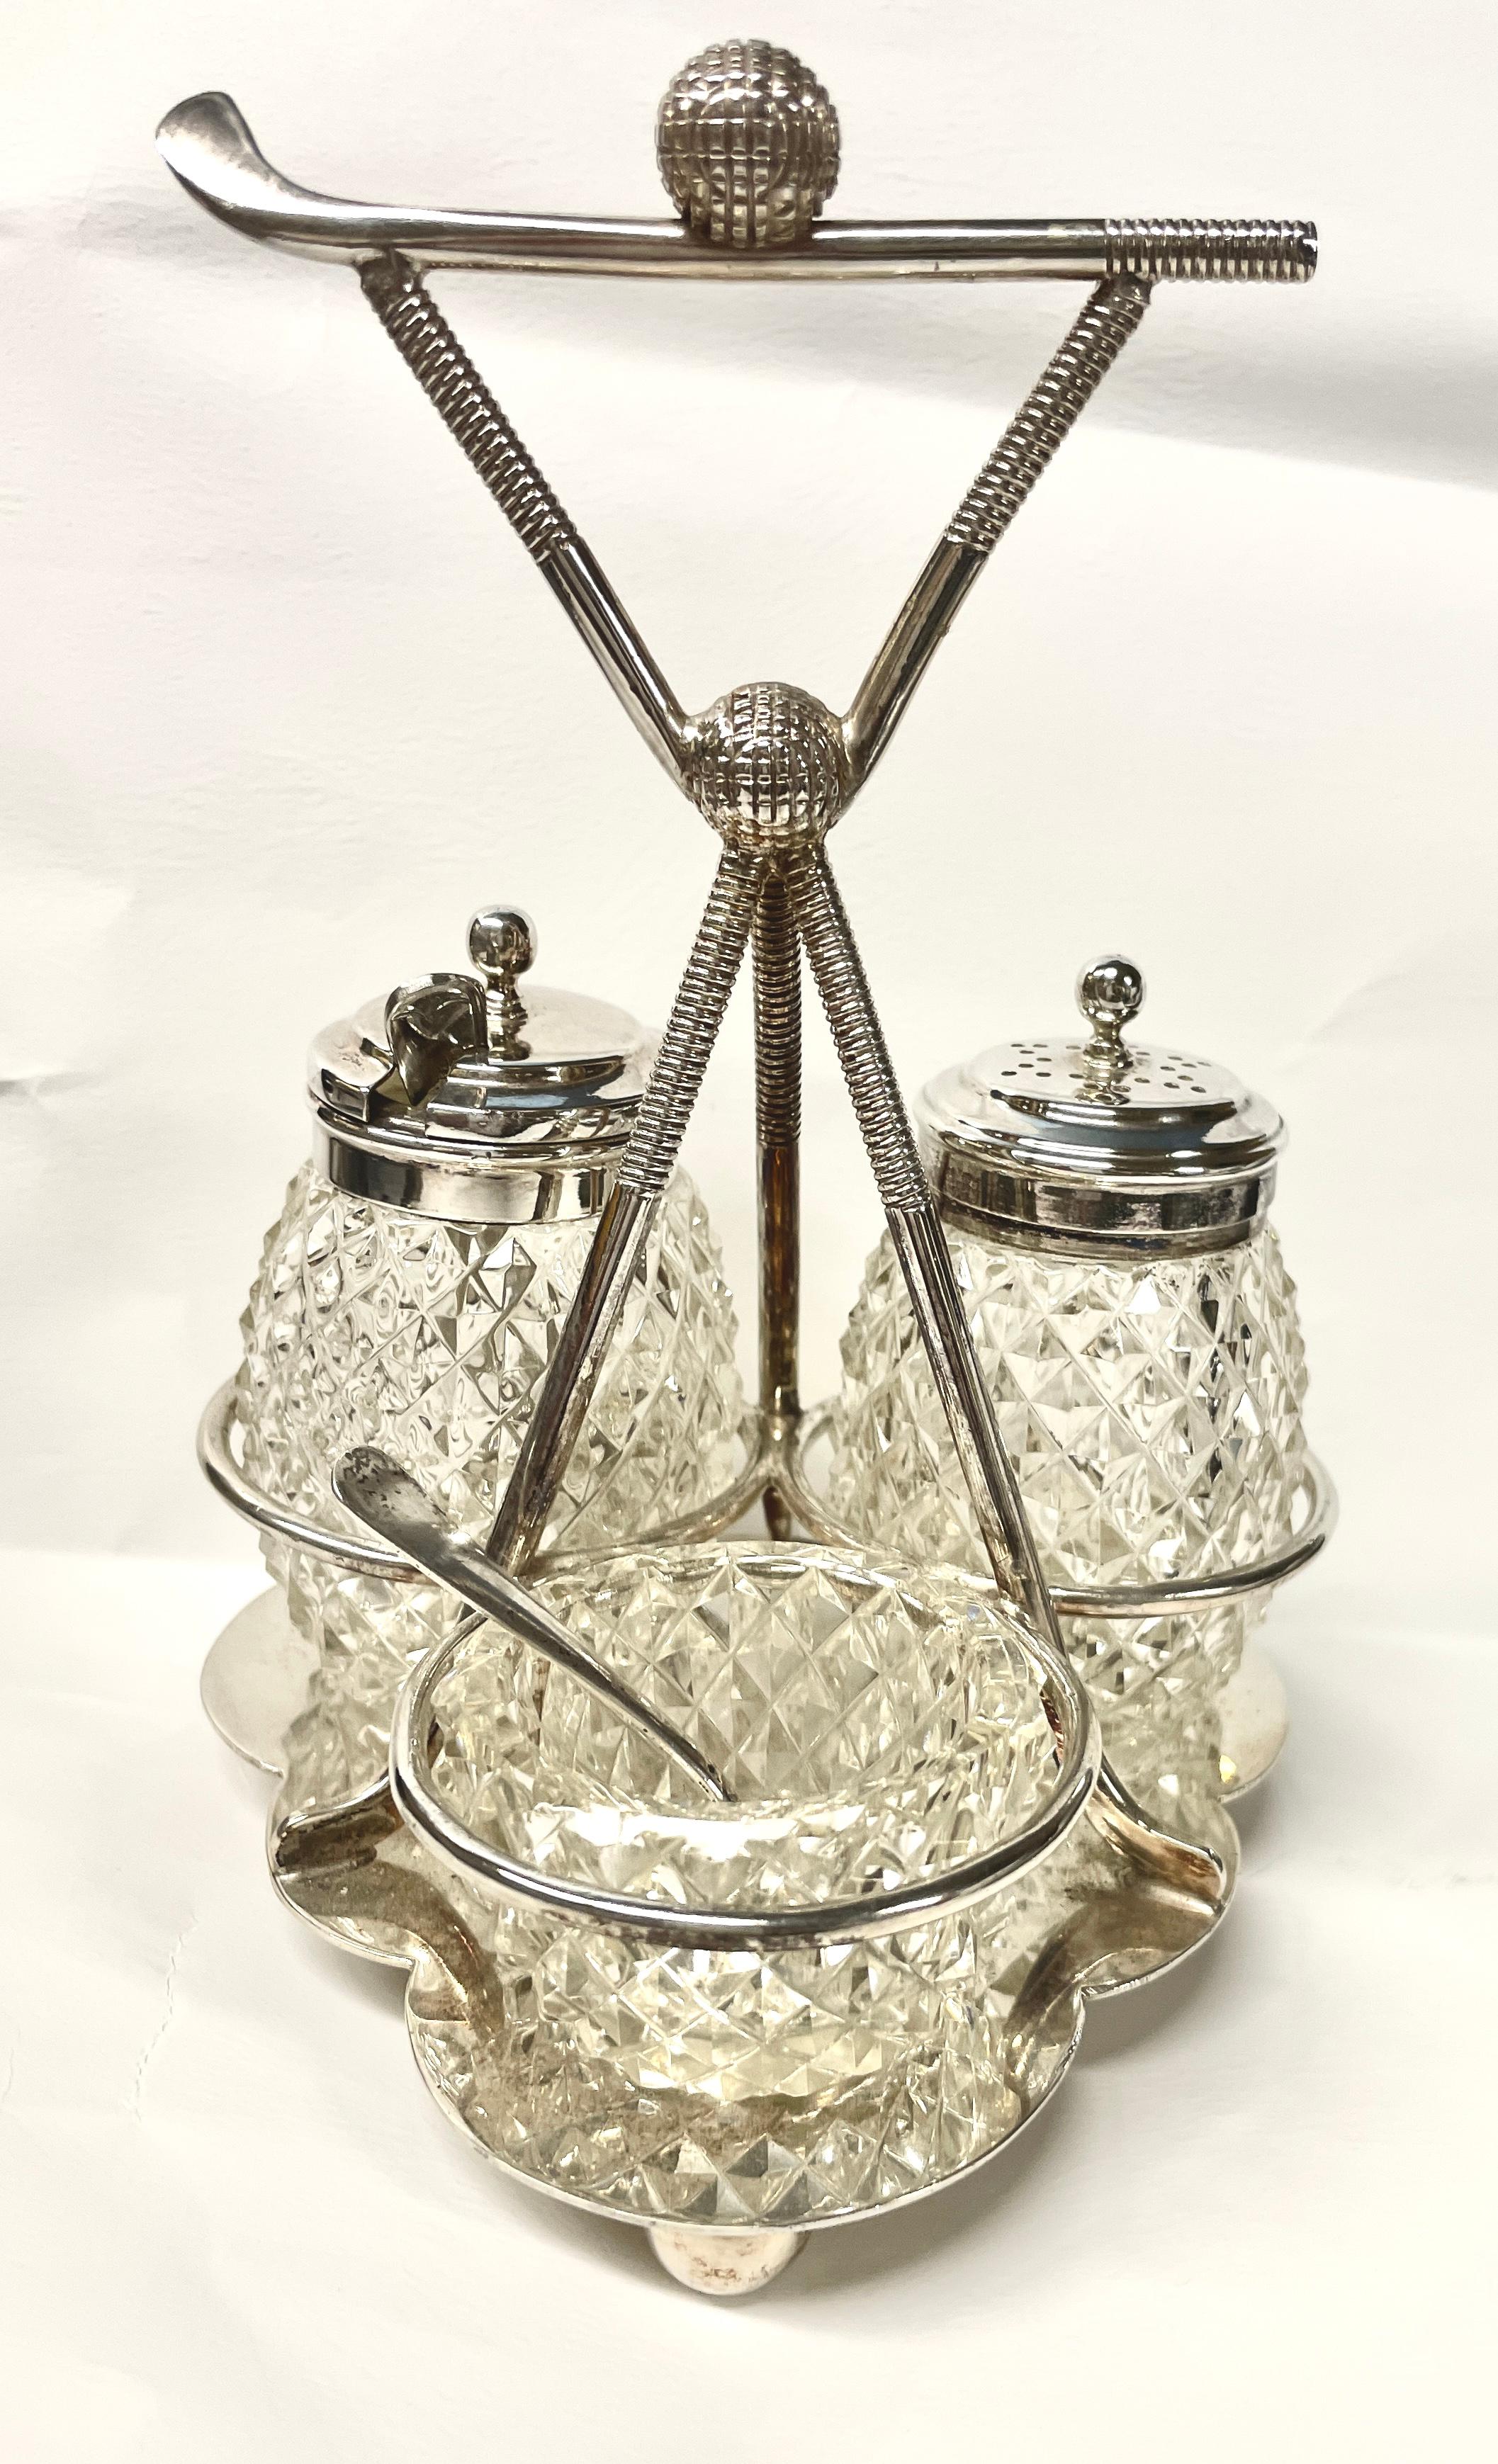 Rare old English silverplate golf motif novelty breakfast cruet. The set includes an open salt cellar with spoon, a mustard pot with spoon and a pepper pot. Please note the use of golf clubs as supports and the hand cut crystal original bottles are